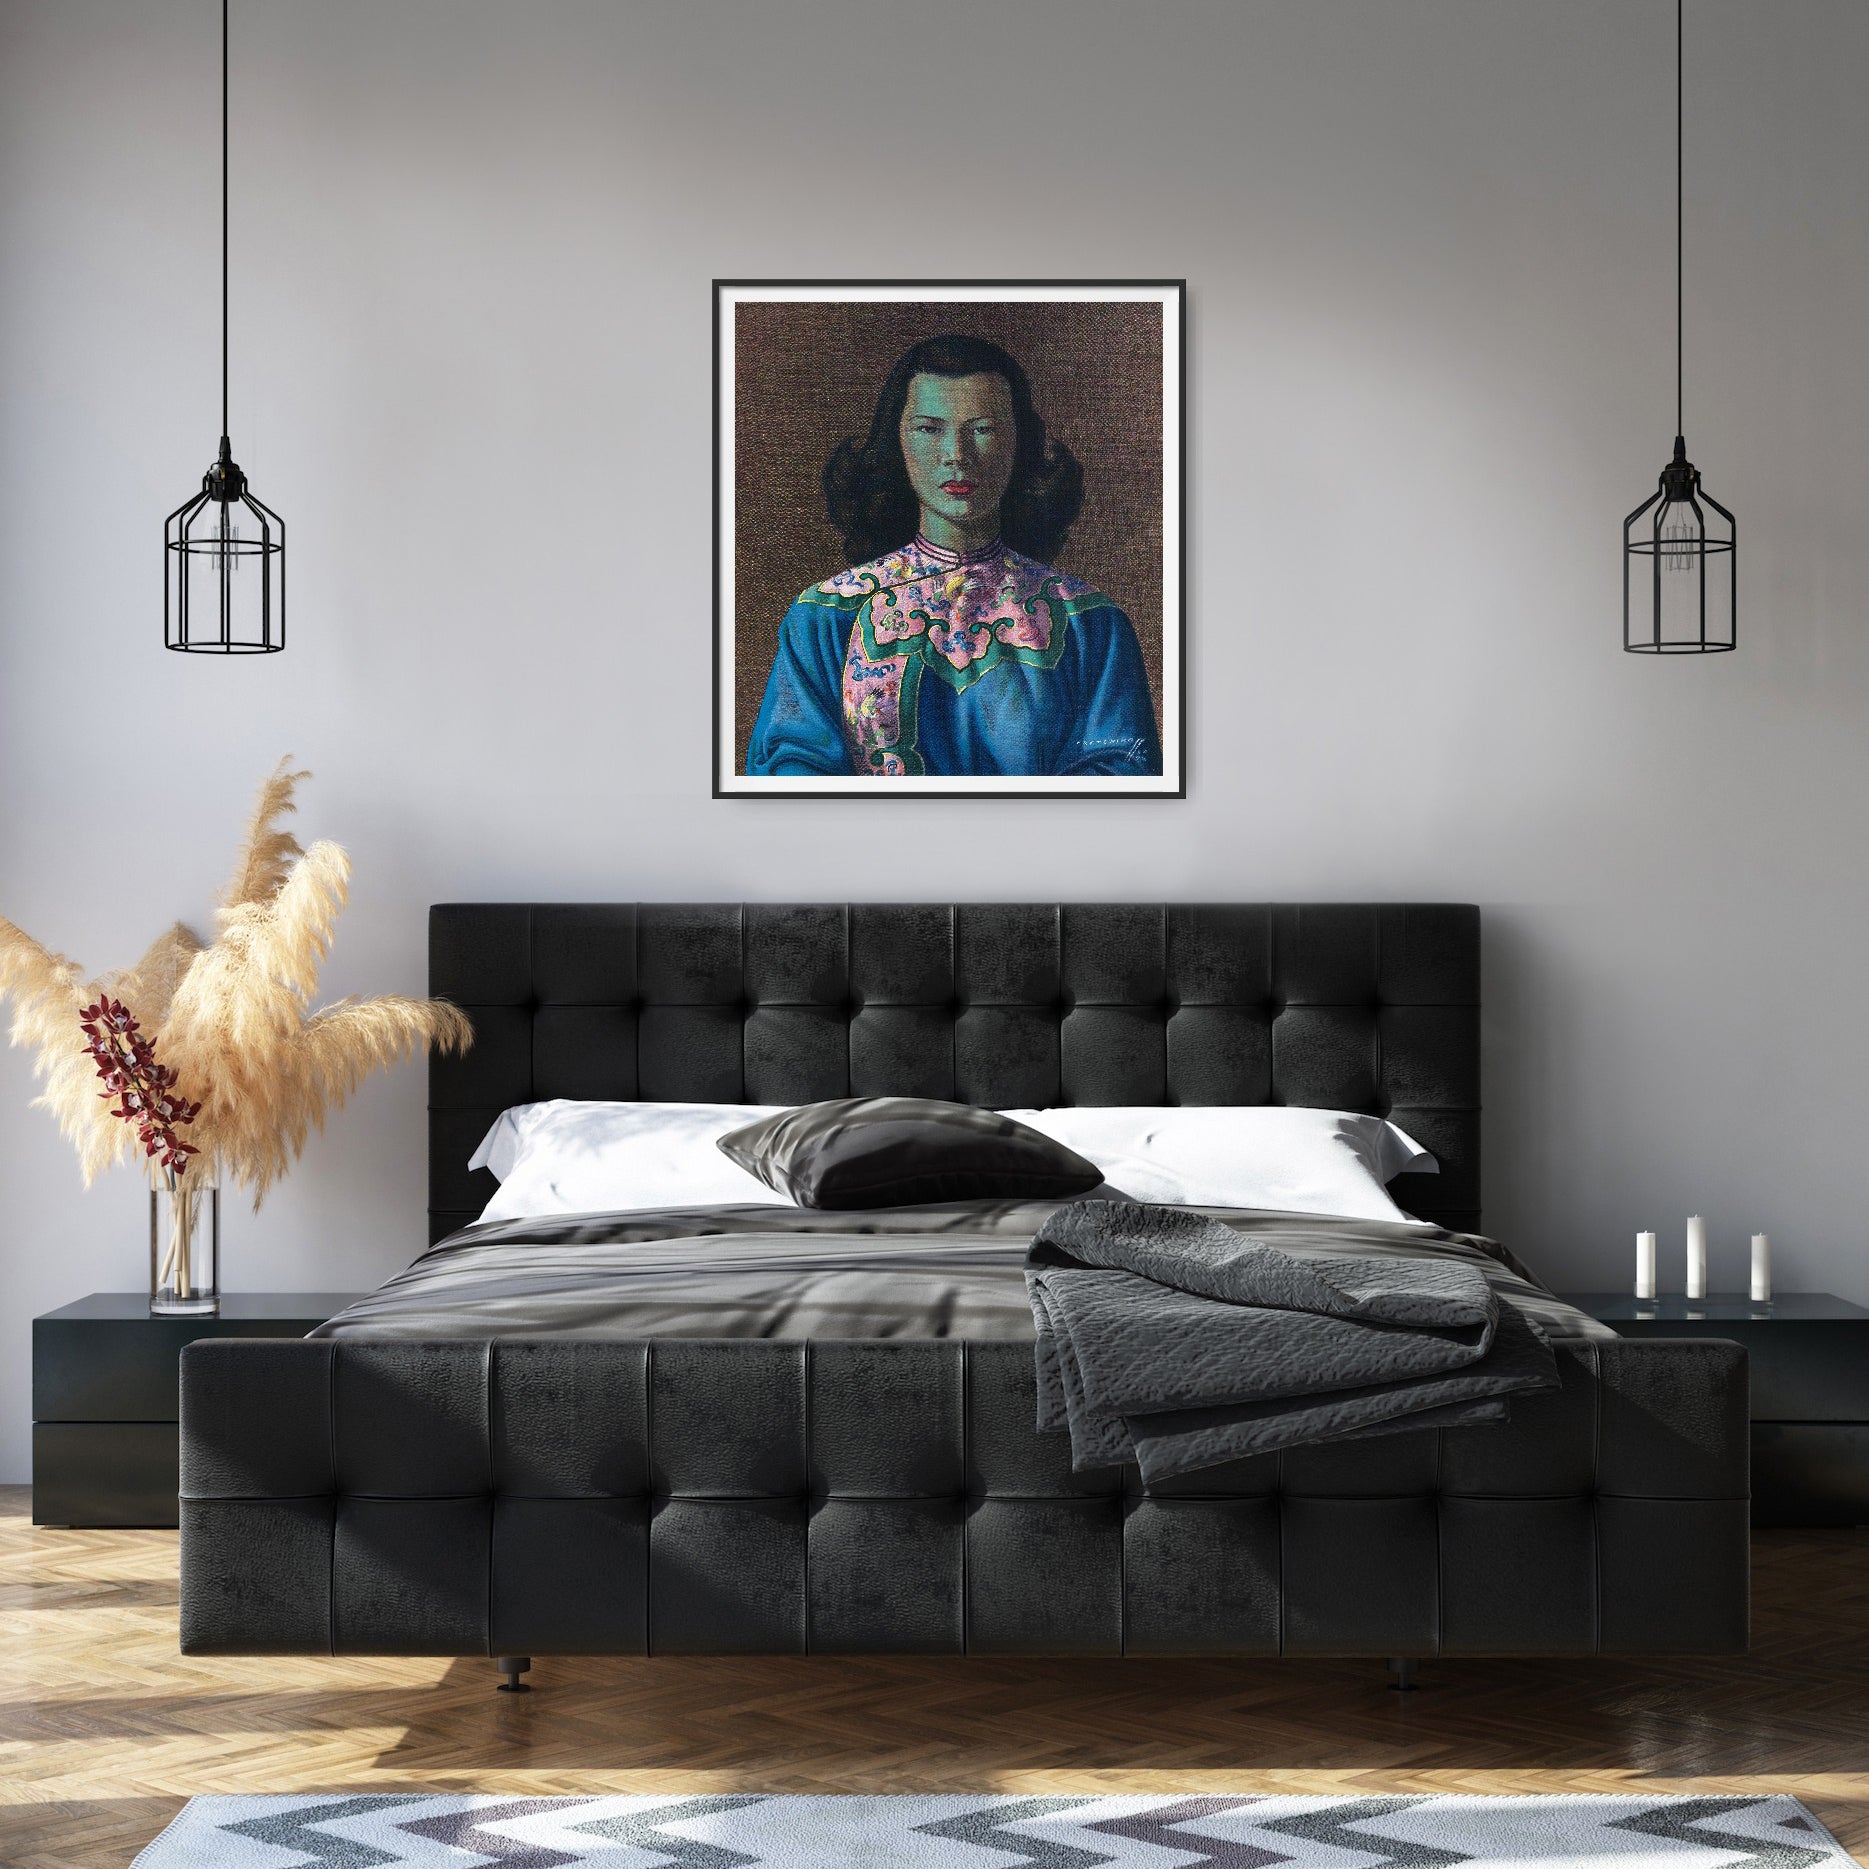 Tretchikoff print Chinese Girl with Blue Jacket in bedroom setting